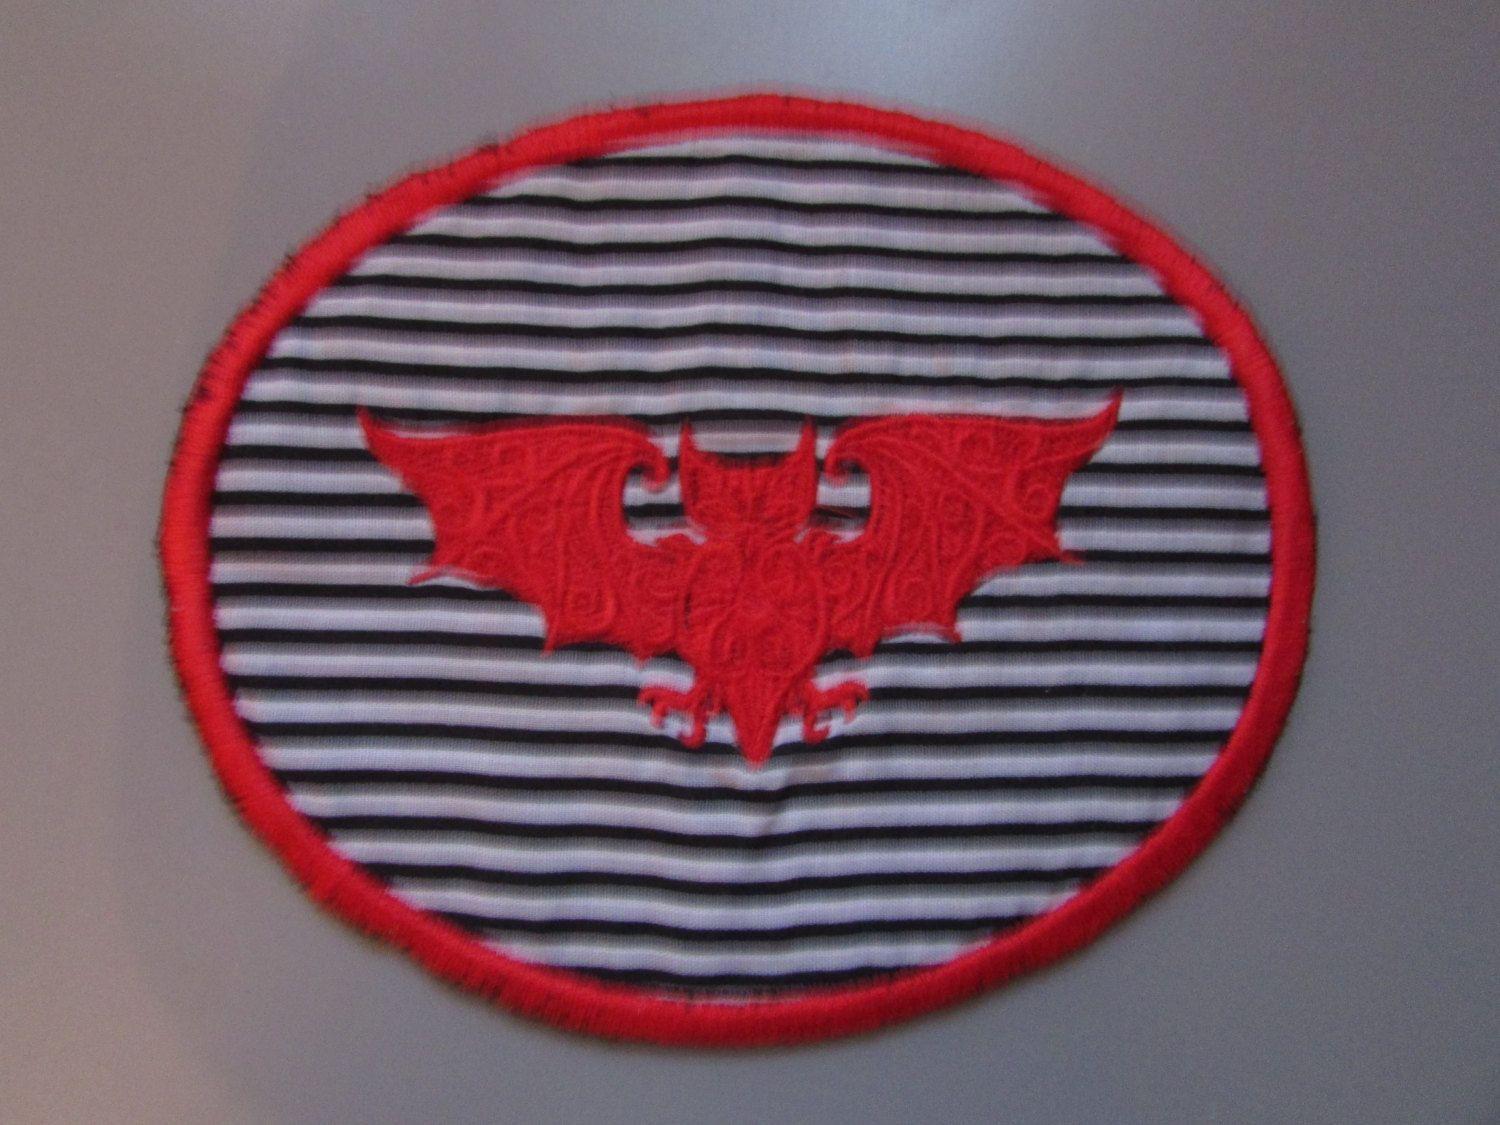 Black Red Bat in Circle Logo - Red Bat Sew on Patch Applique Gothic